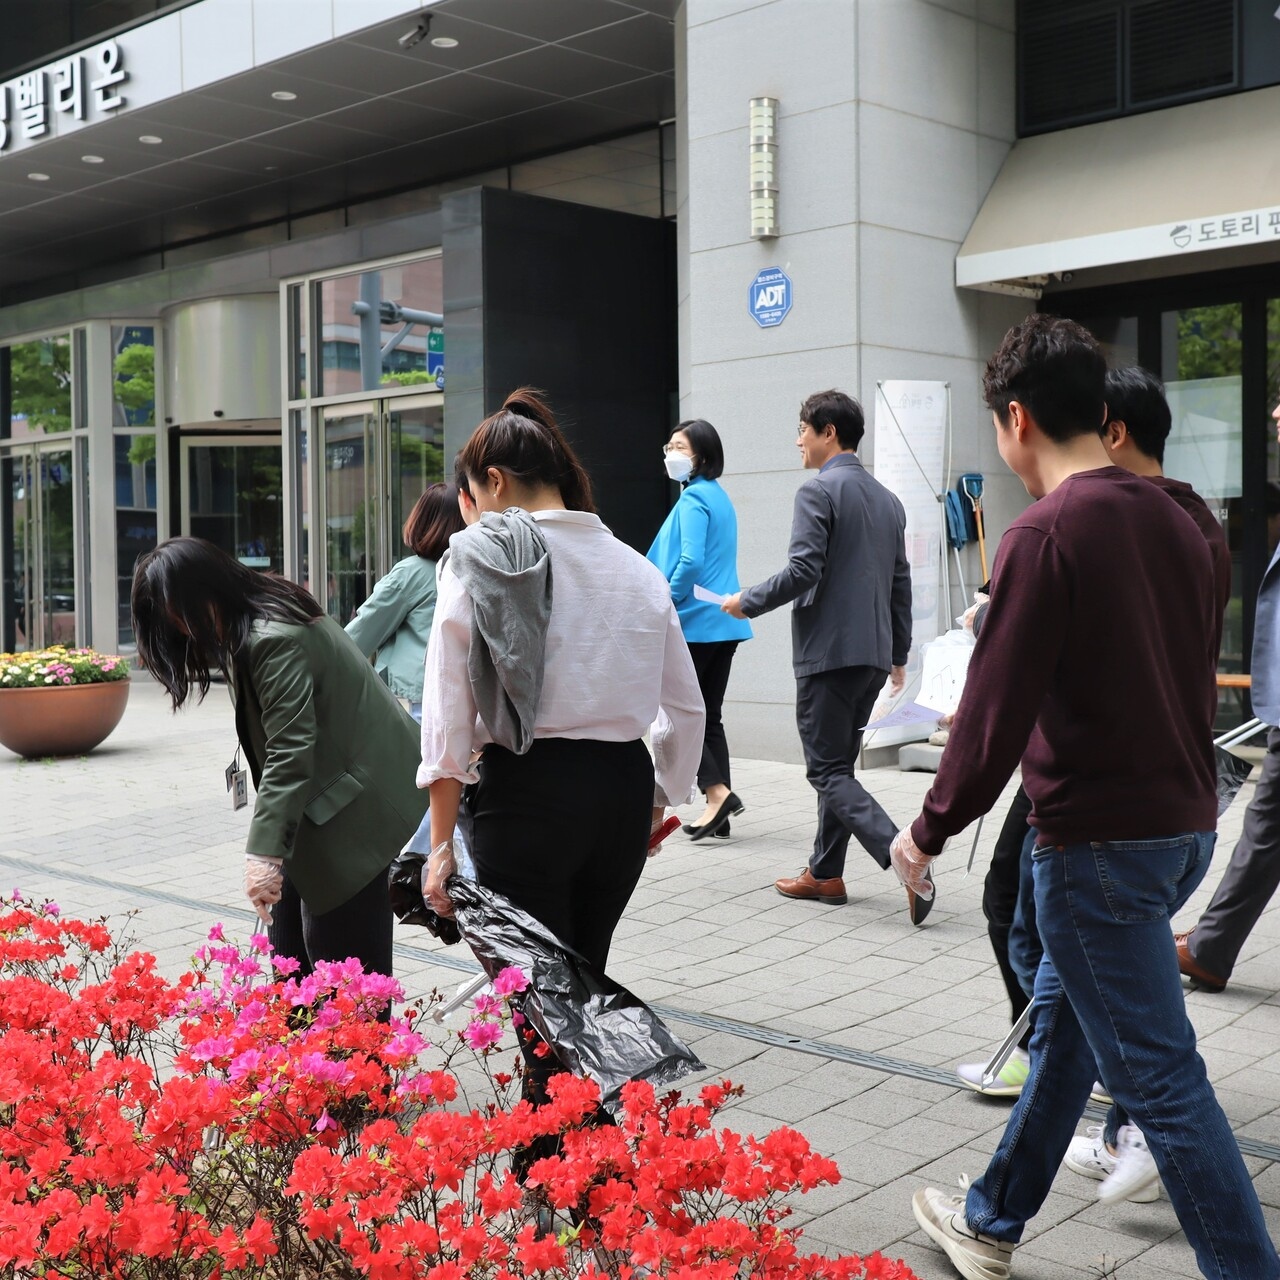 ZEISS employees in Korea picking up litter on earth day